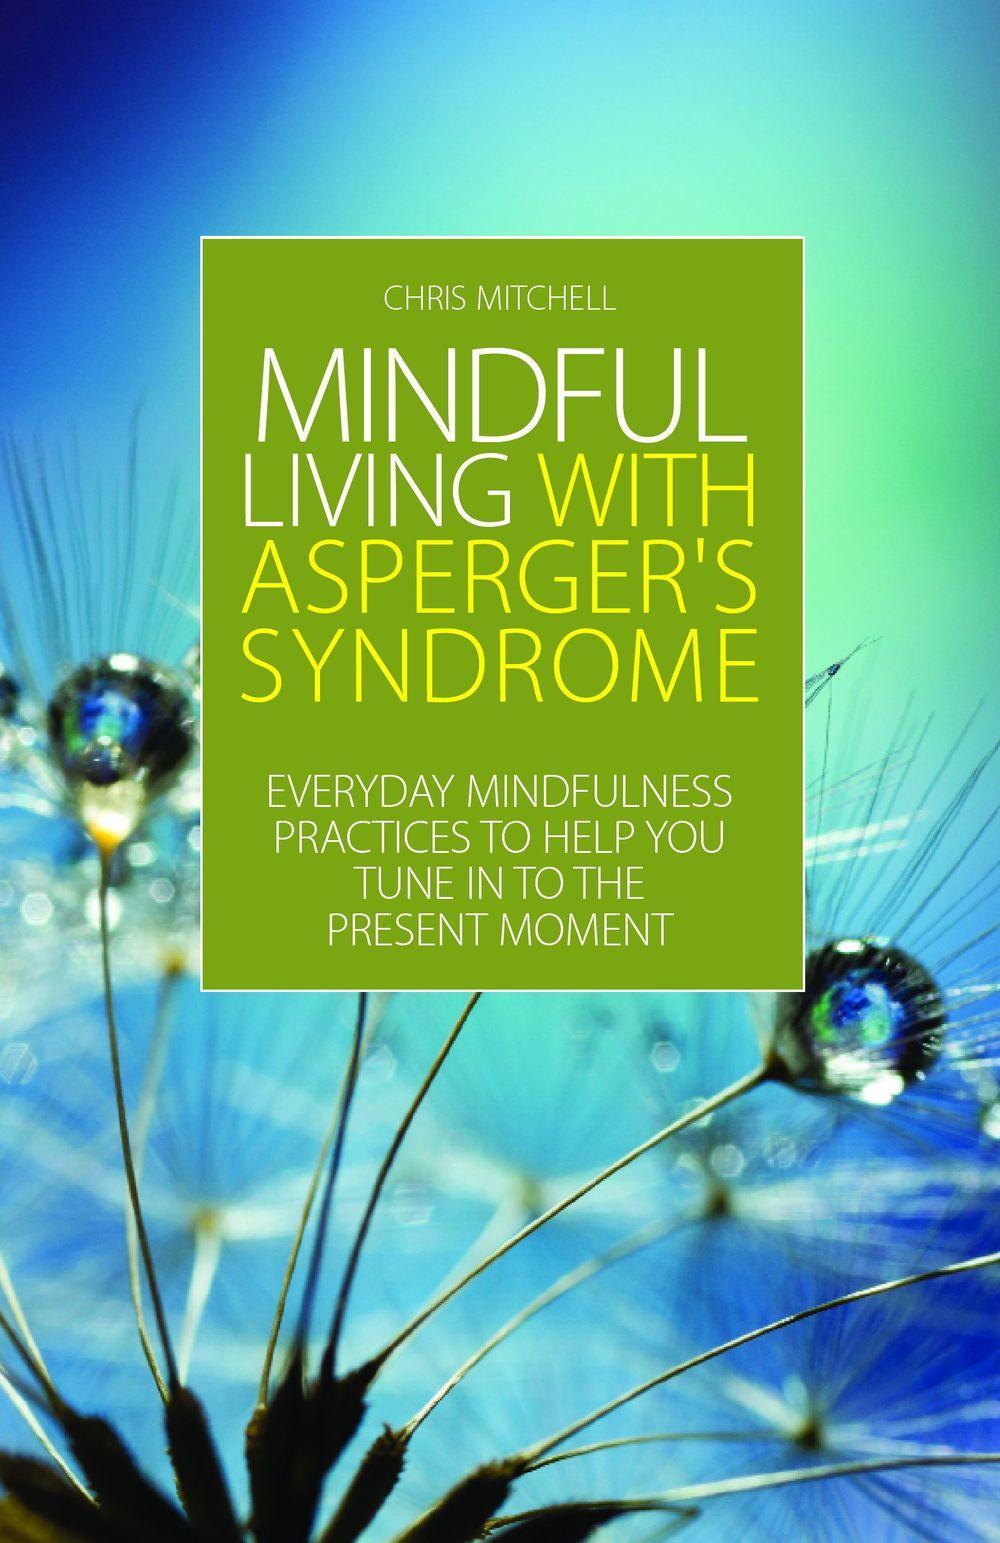 Mindful Living with Asperger's Syndrome - Chris Mitchell